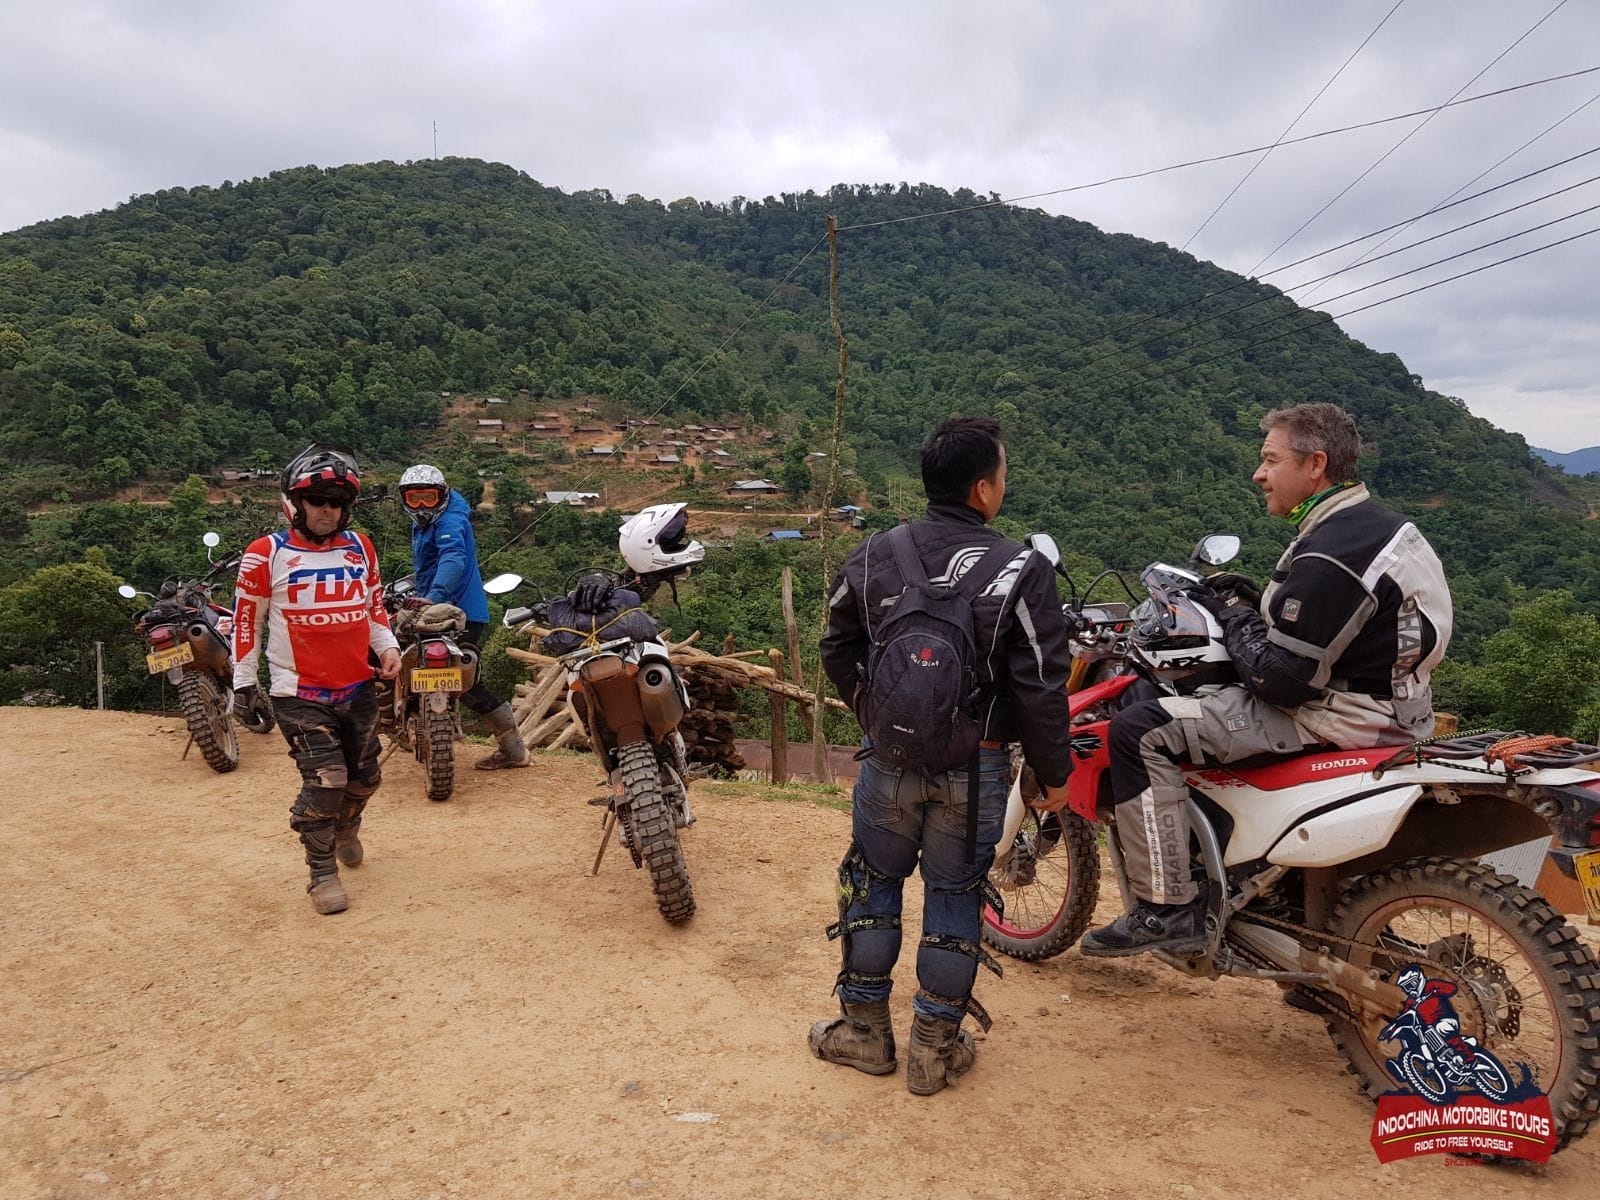 Laos Offroad Motorcycle Tour 4 - Laos Exploration Motorbike Tours Of Rivers And Waterfalls